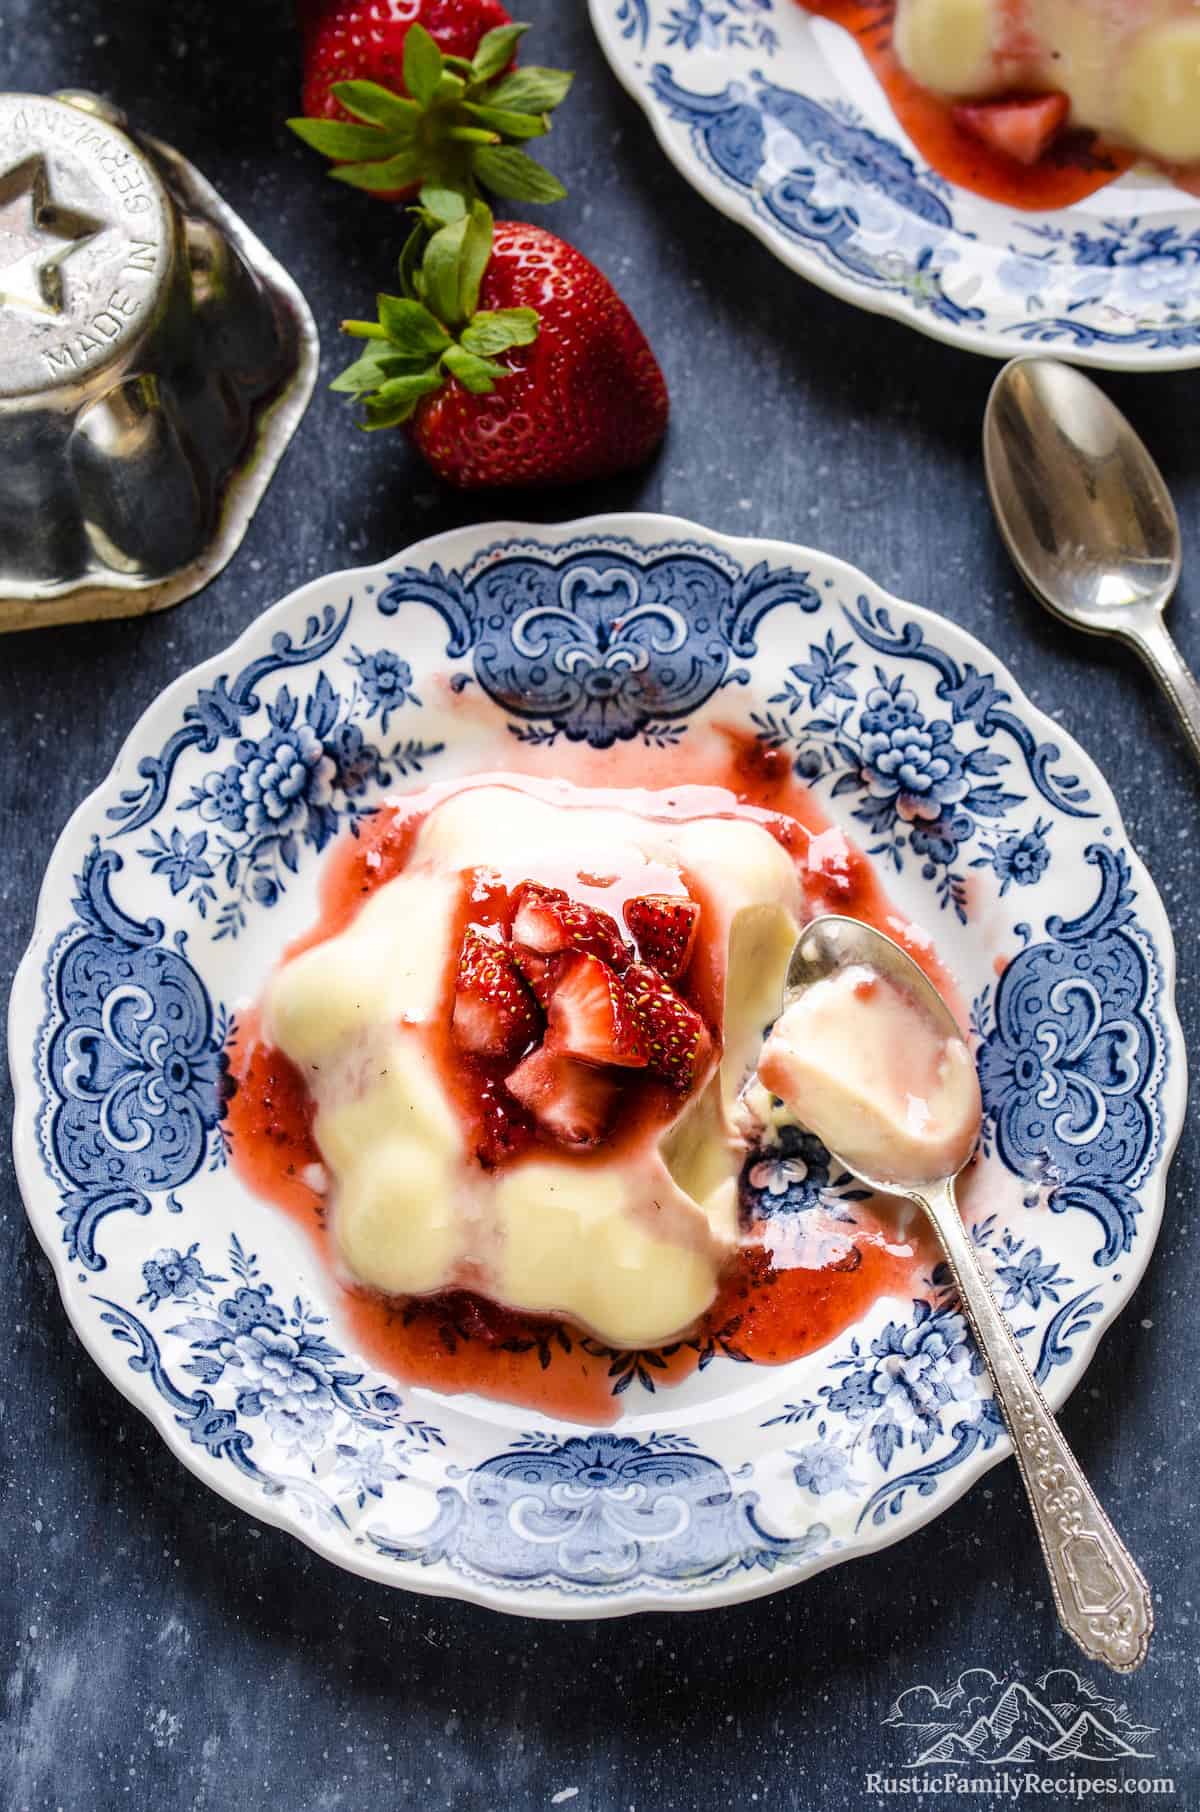 Top view of vanilla budino topped with strawberry sauce on a plate, with spoonfuls missing.